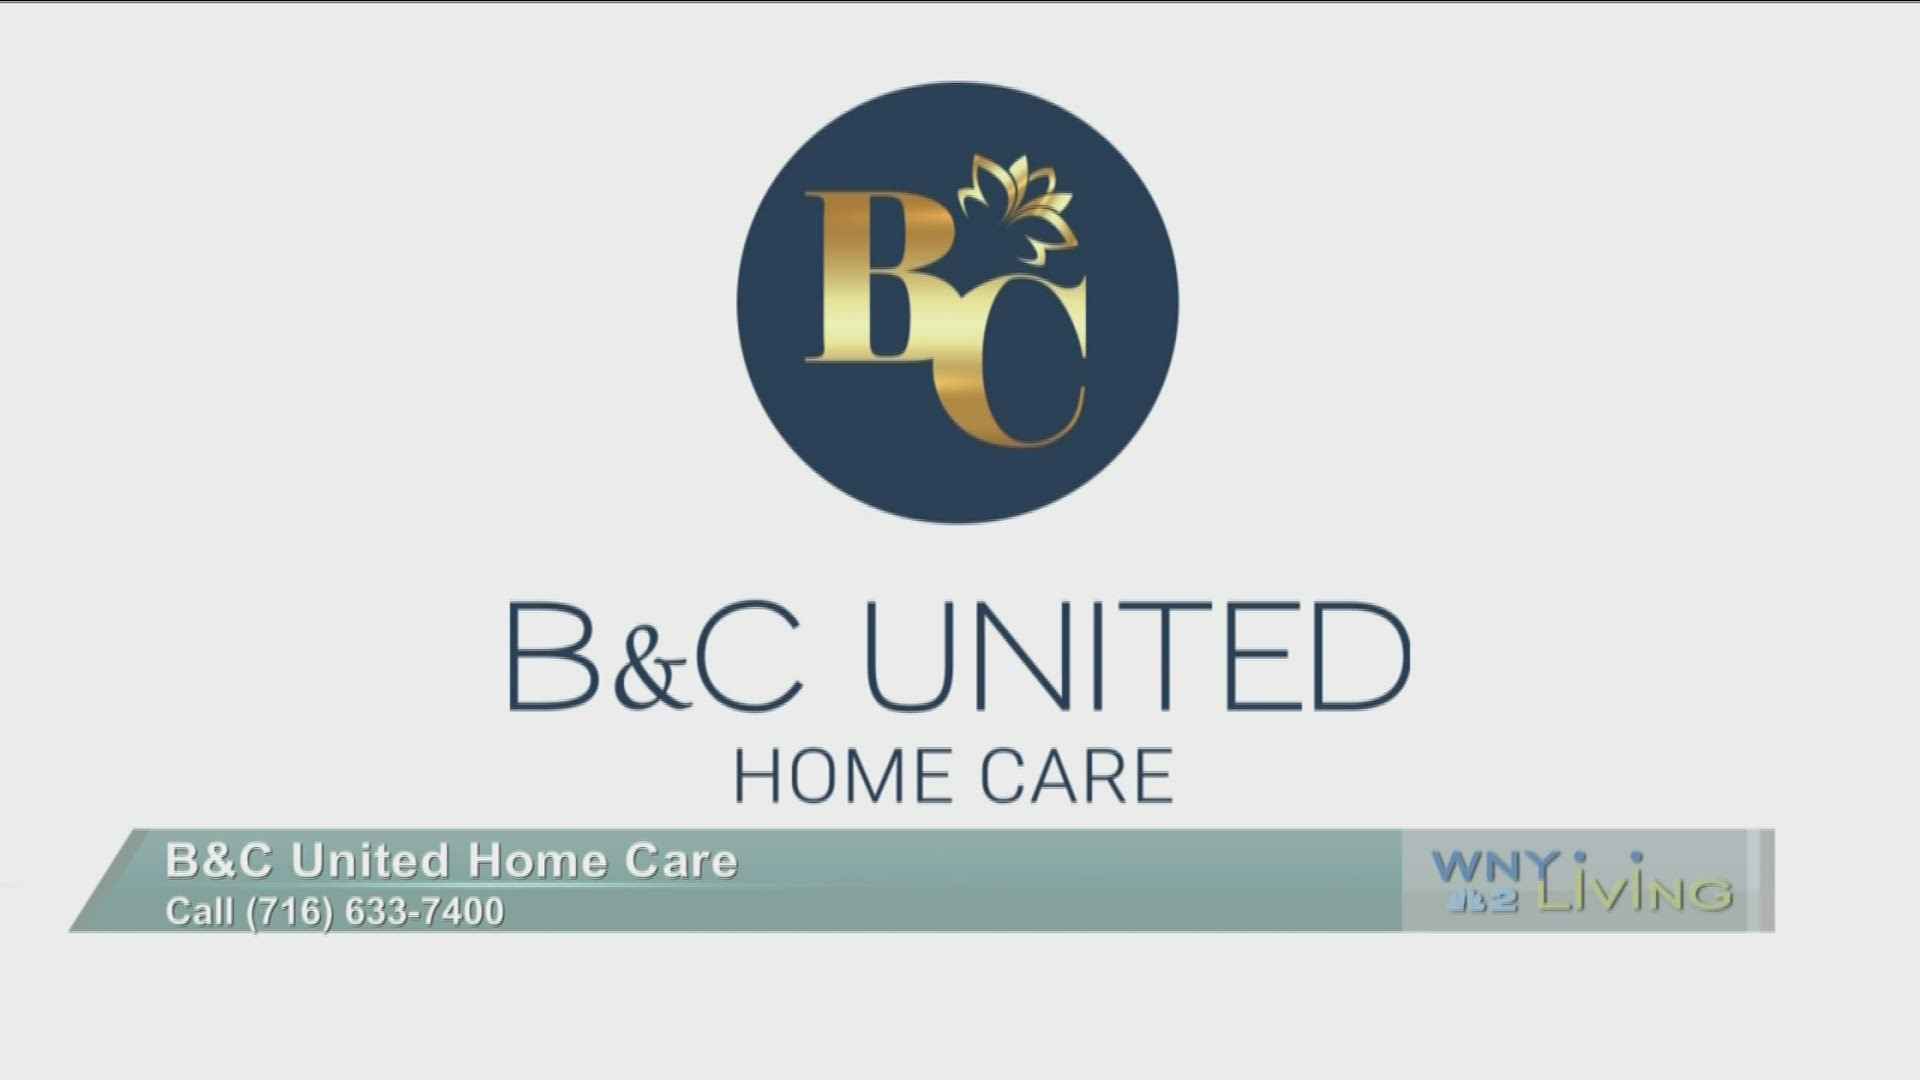 November 30 - B&C United Home Care (THIS VIDEO IS SPONSORED BY B&C UNITED HOME CARE)